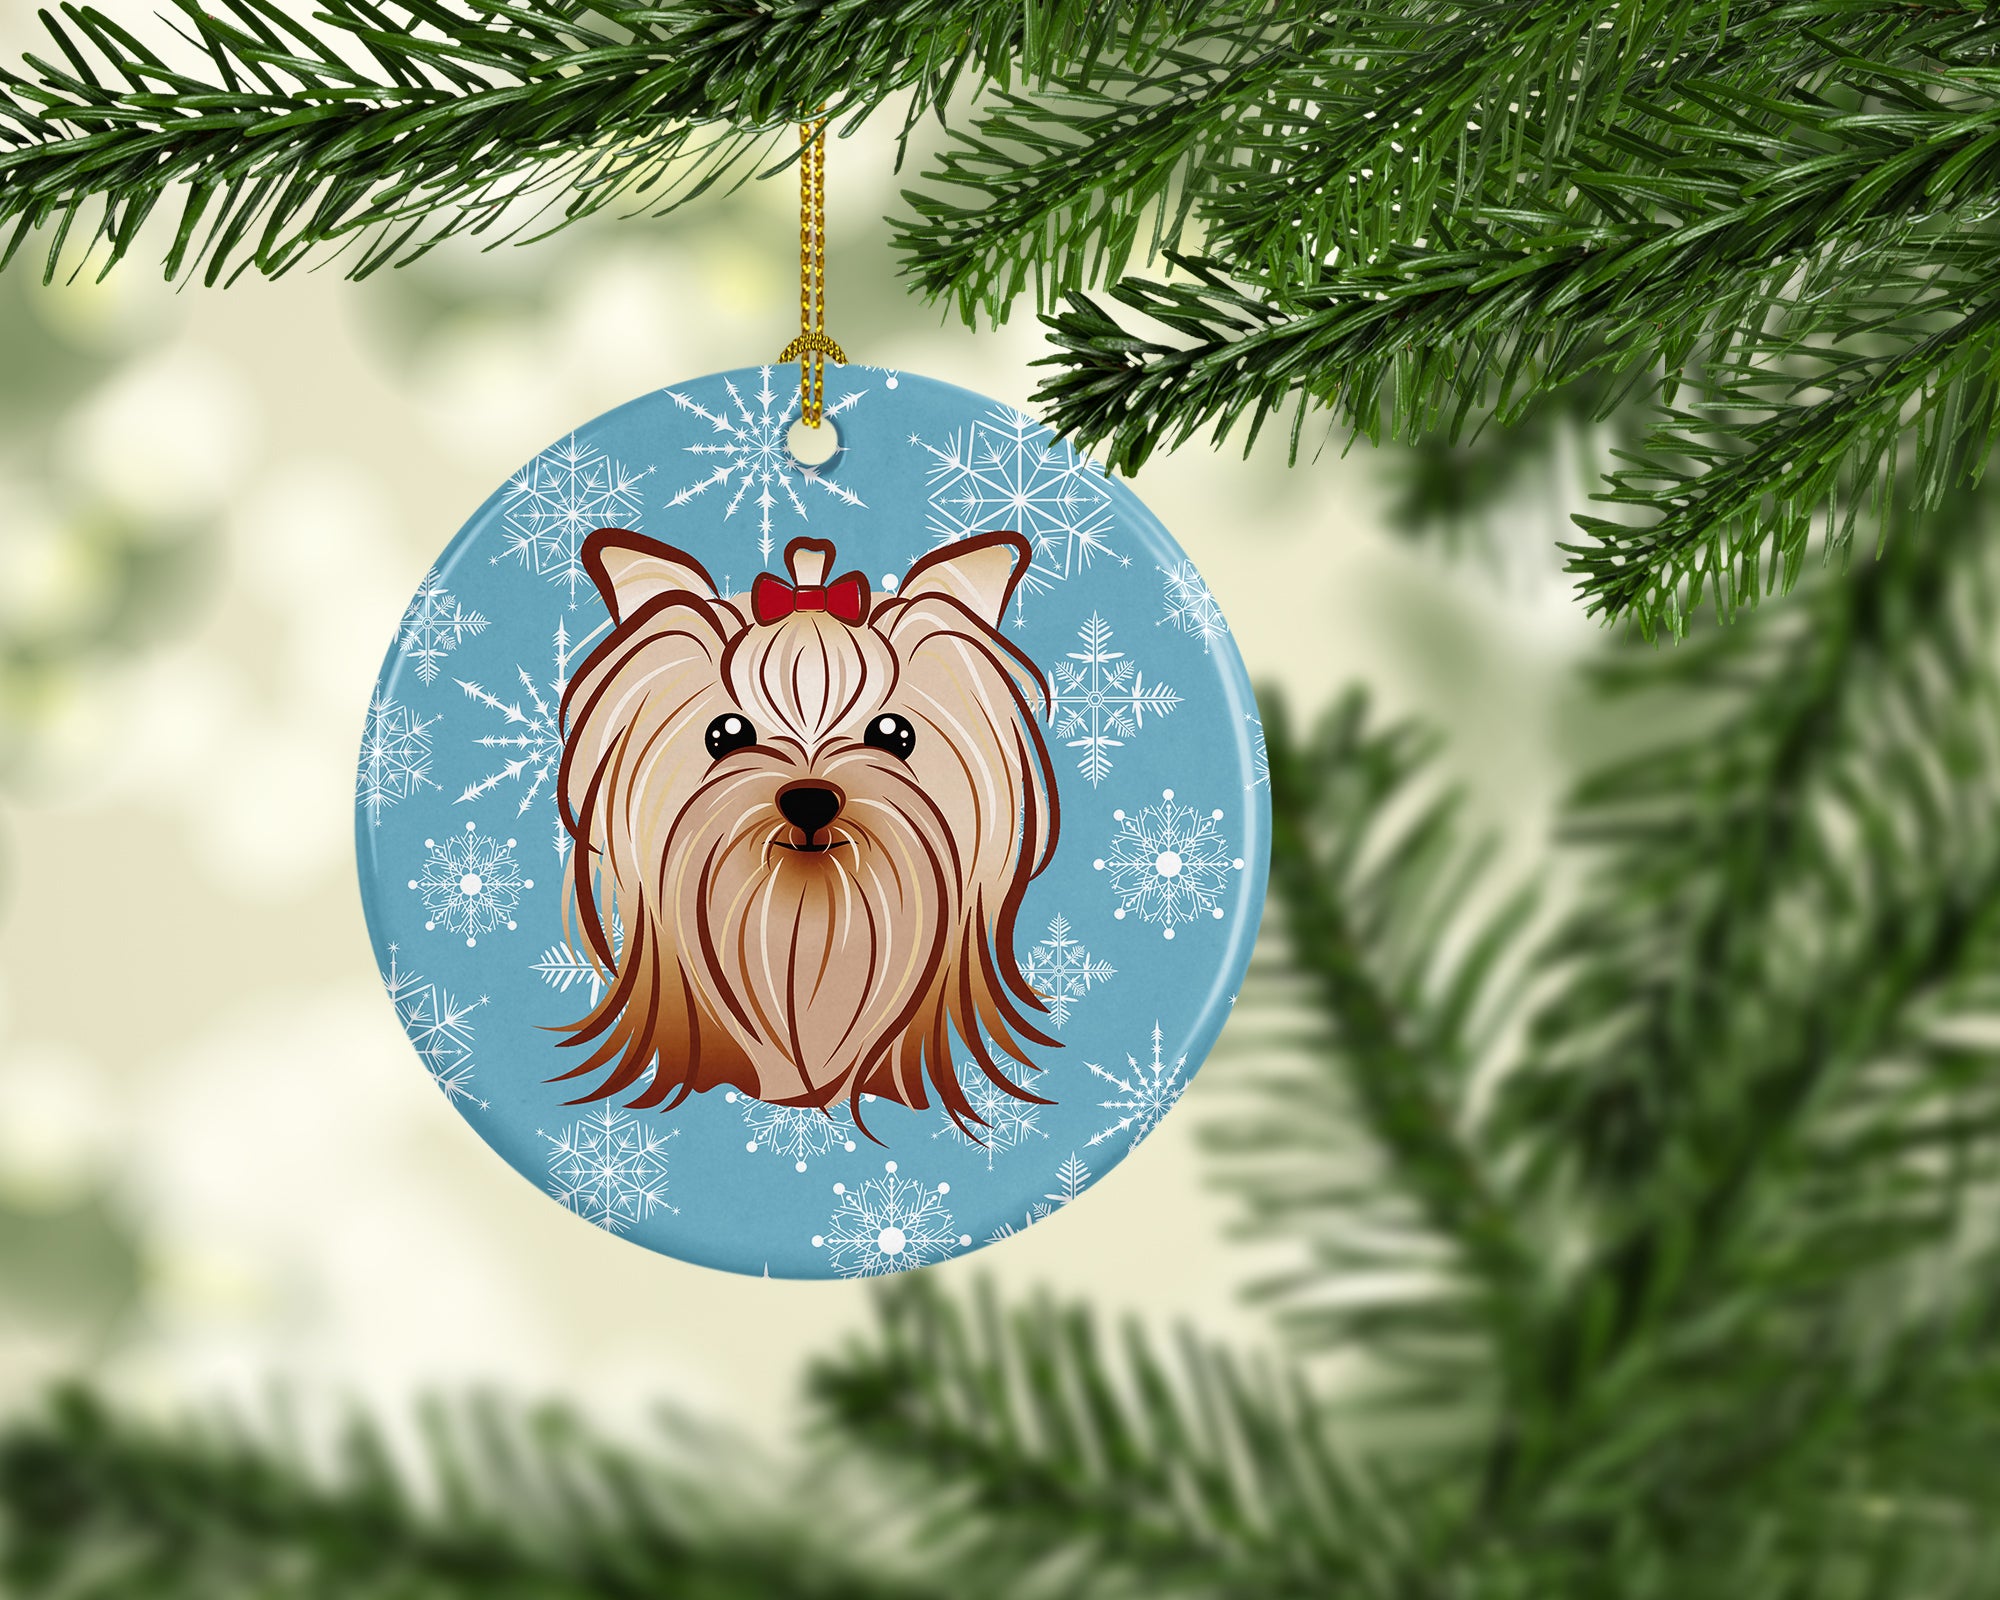 Snowflake Yorkie Yorkishire Terrier Ceramic Ornament BB1638CO1 - the-store.com